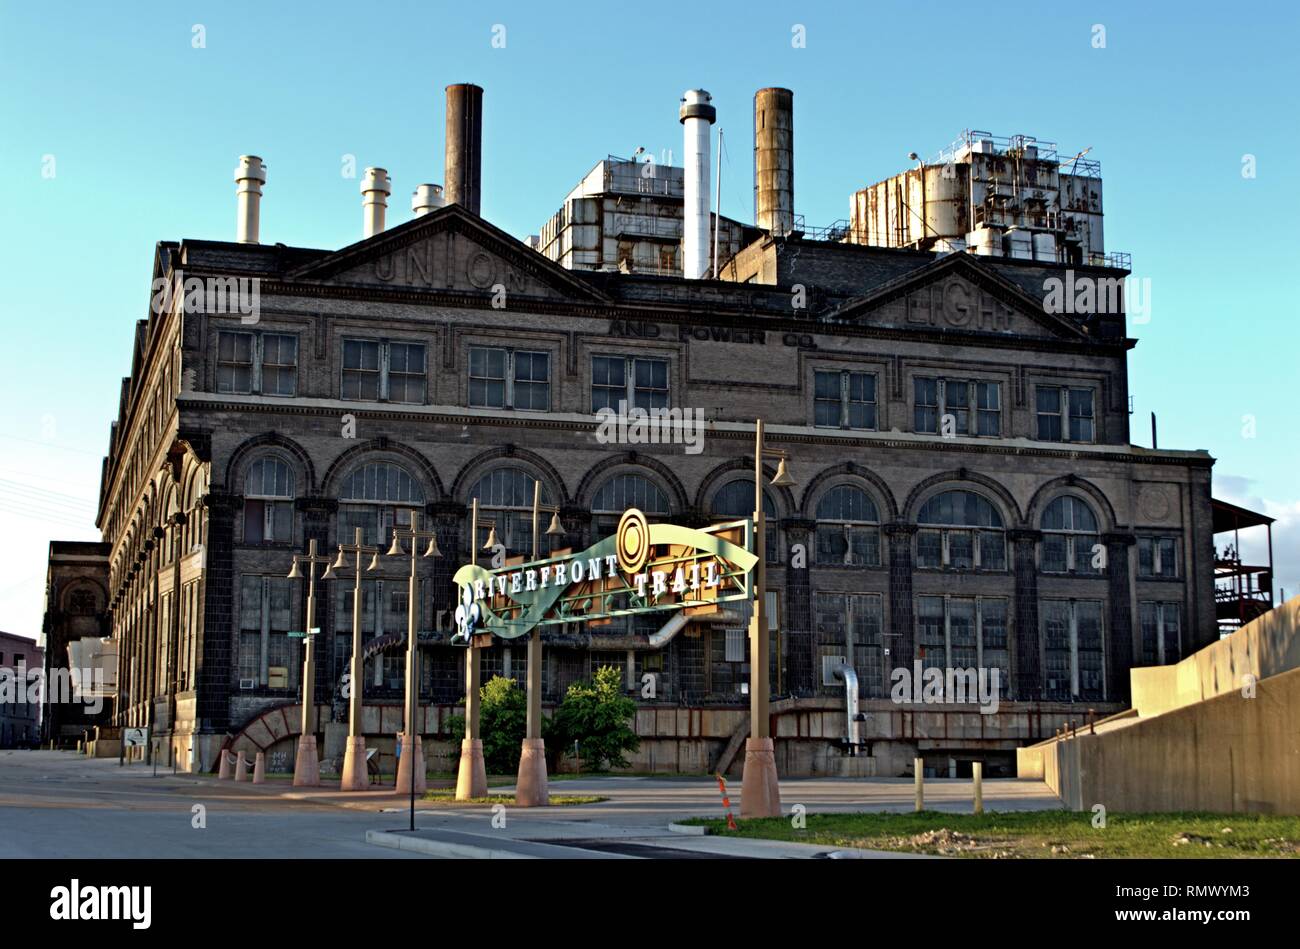 The old Union Light and Power Company in St Louis Missouri located next to the Riverfront trail. Stock Photo